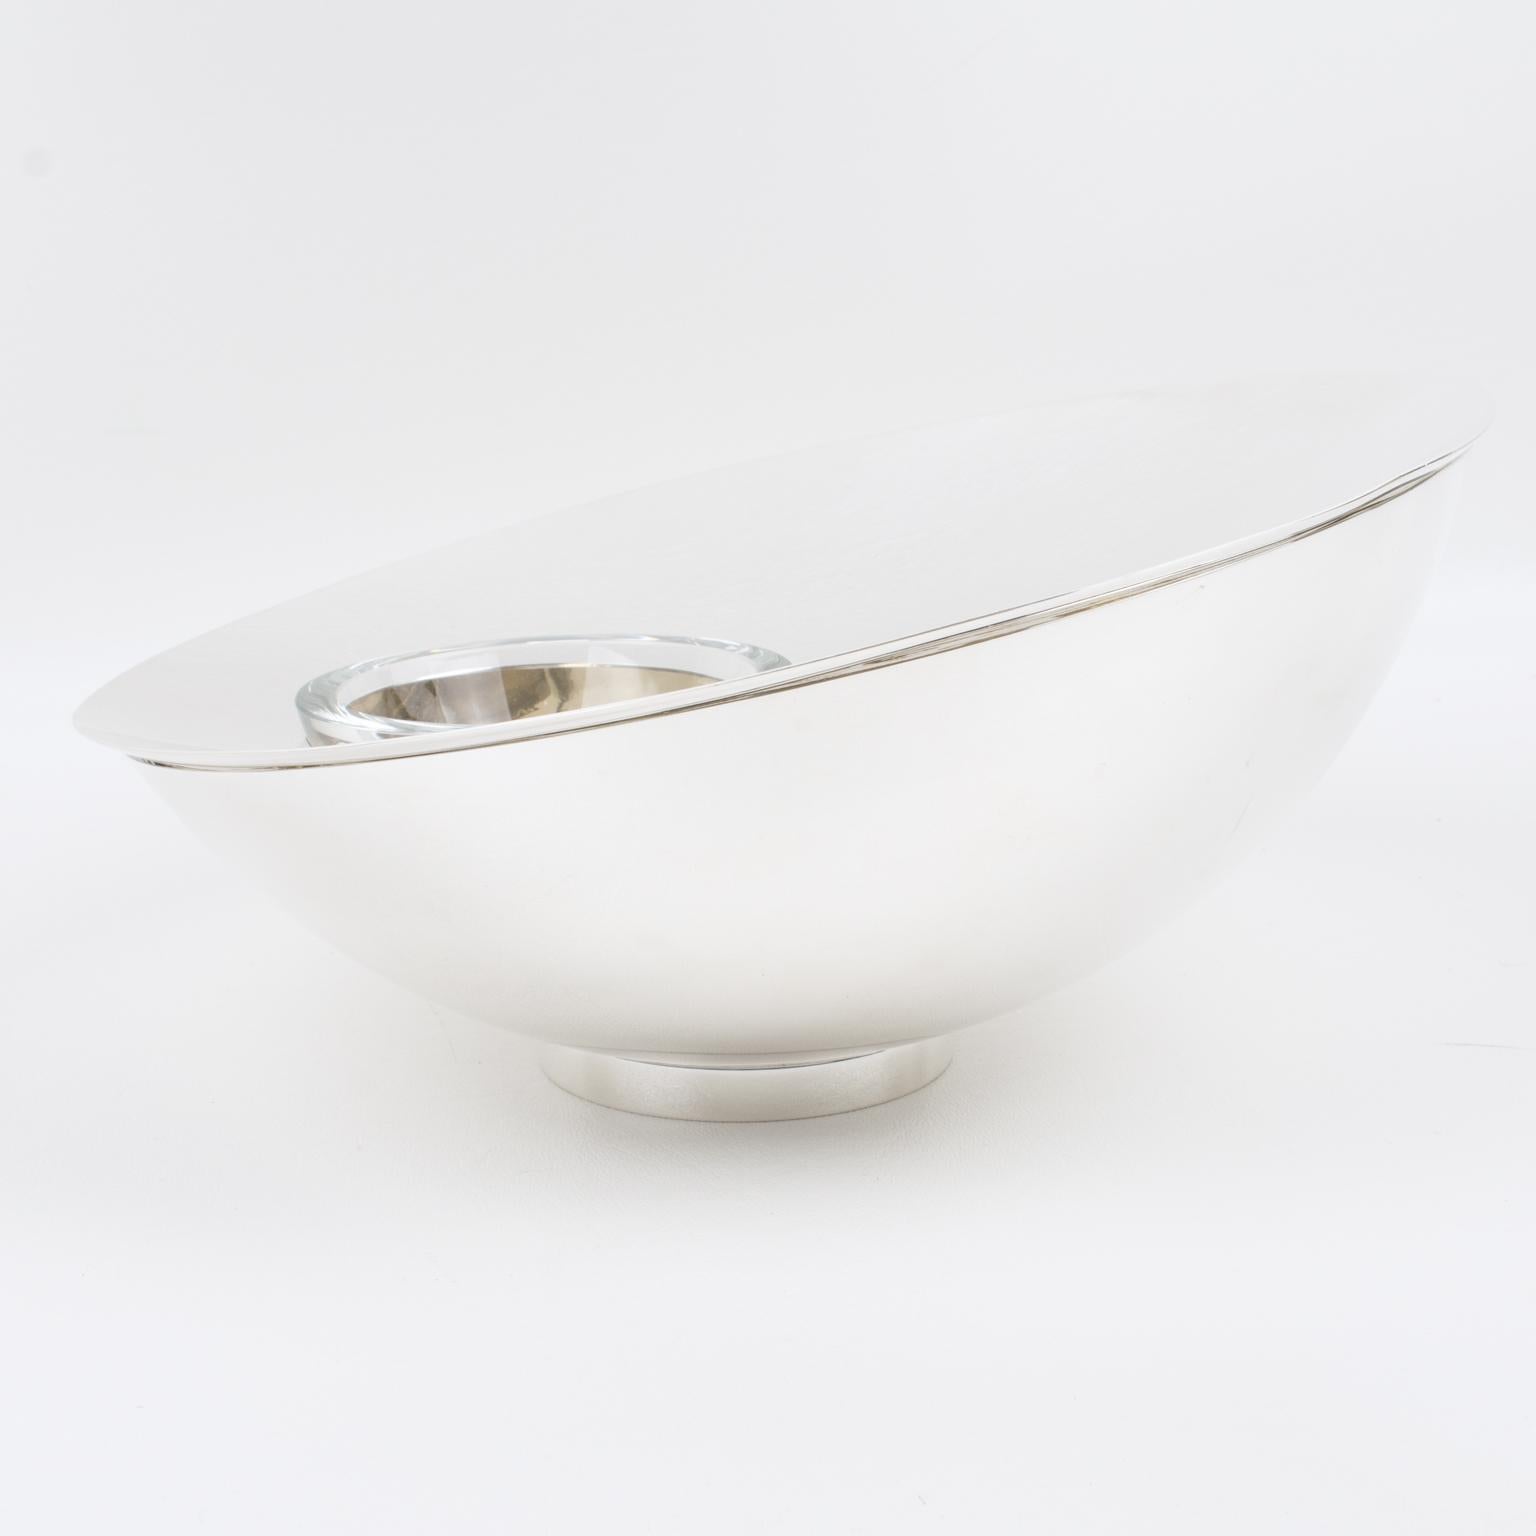 Silver Plate and Crystal Caviar Bowl Dish by Nan Swid for SwidPowell 2